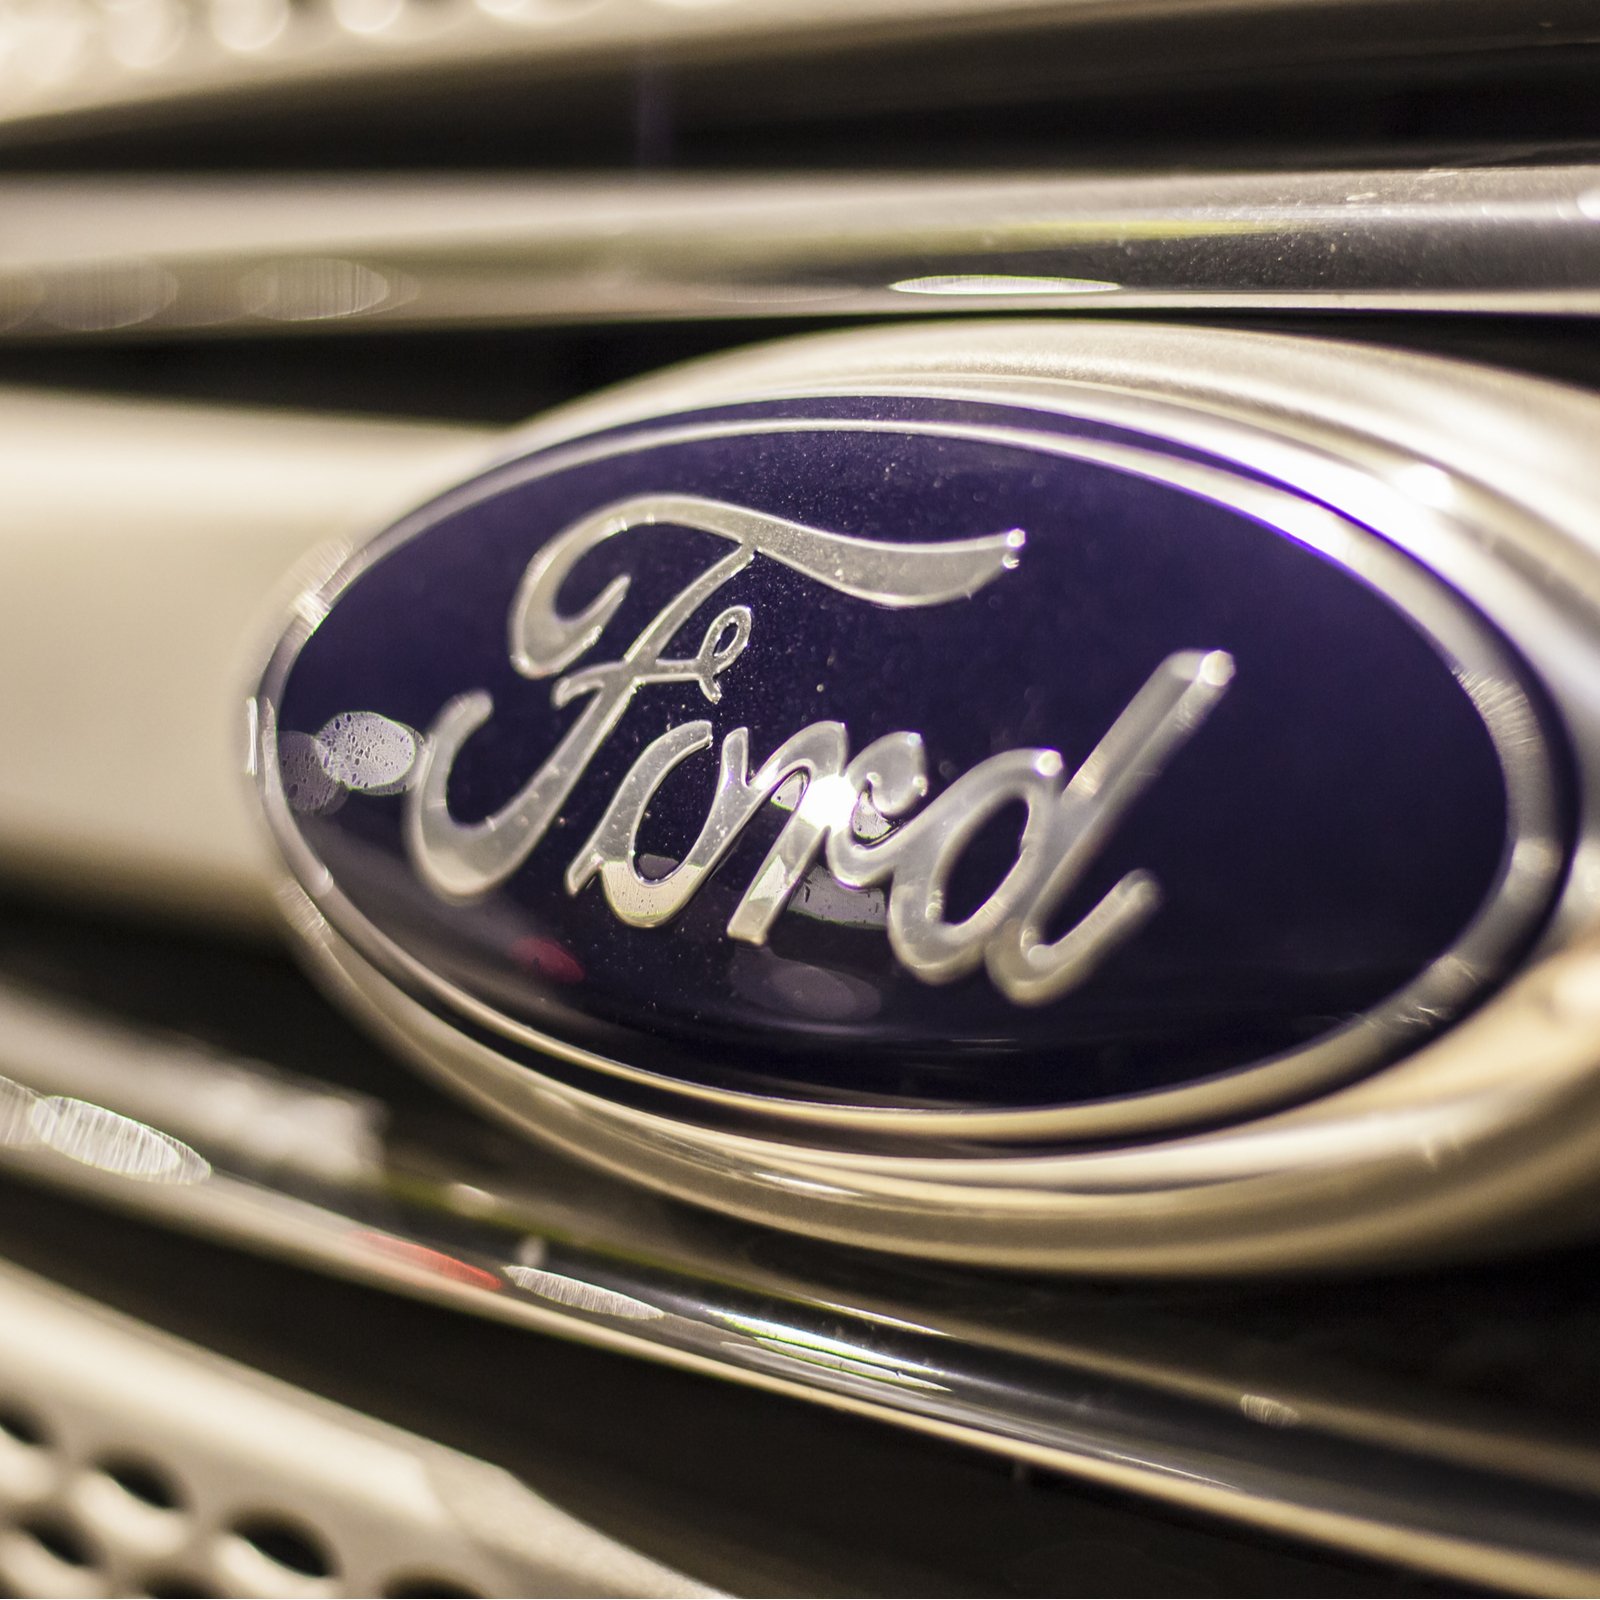 Ford to Use Cryptocurrency for Inter-Vehicle Communication System